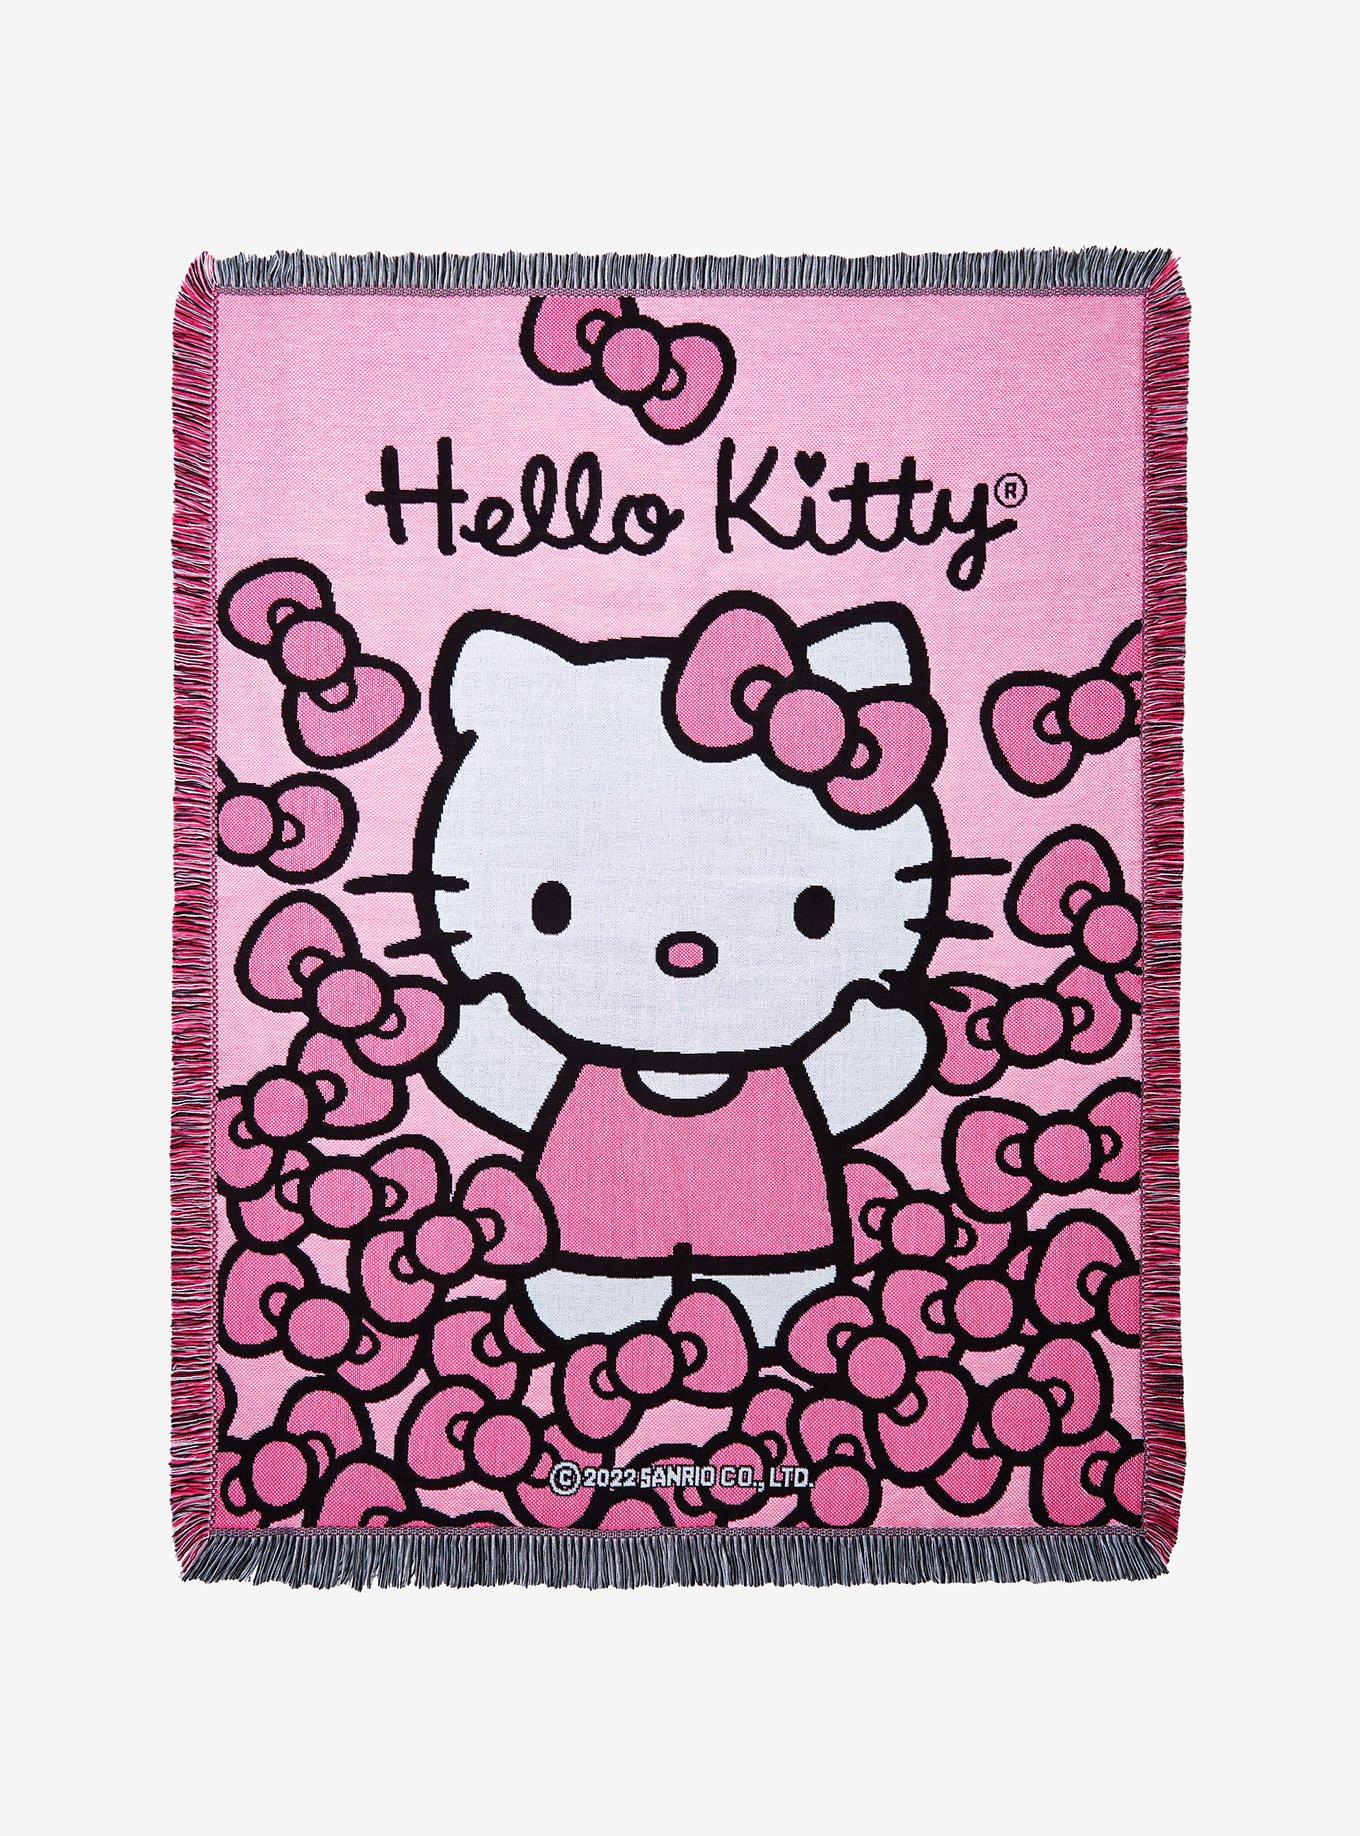 Hello Kitty Sanrio Blanket Quilt Tapestry 36.5”x31” Cute Flowers Bees Birds  Bugs